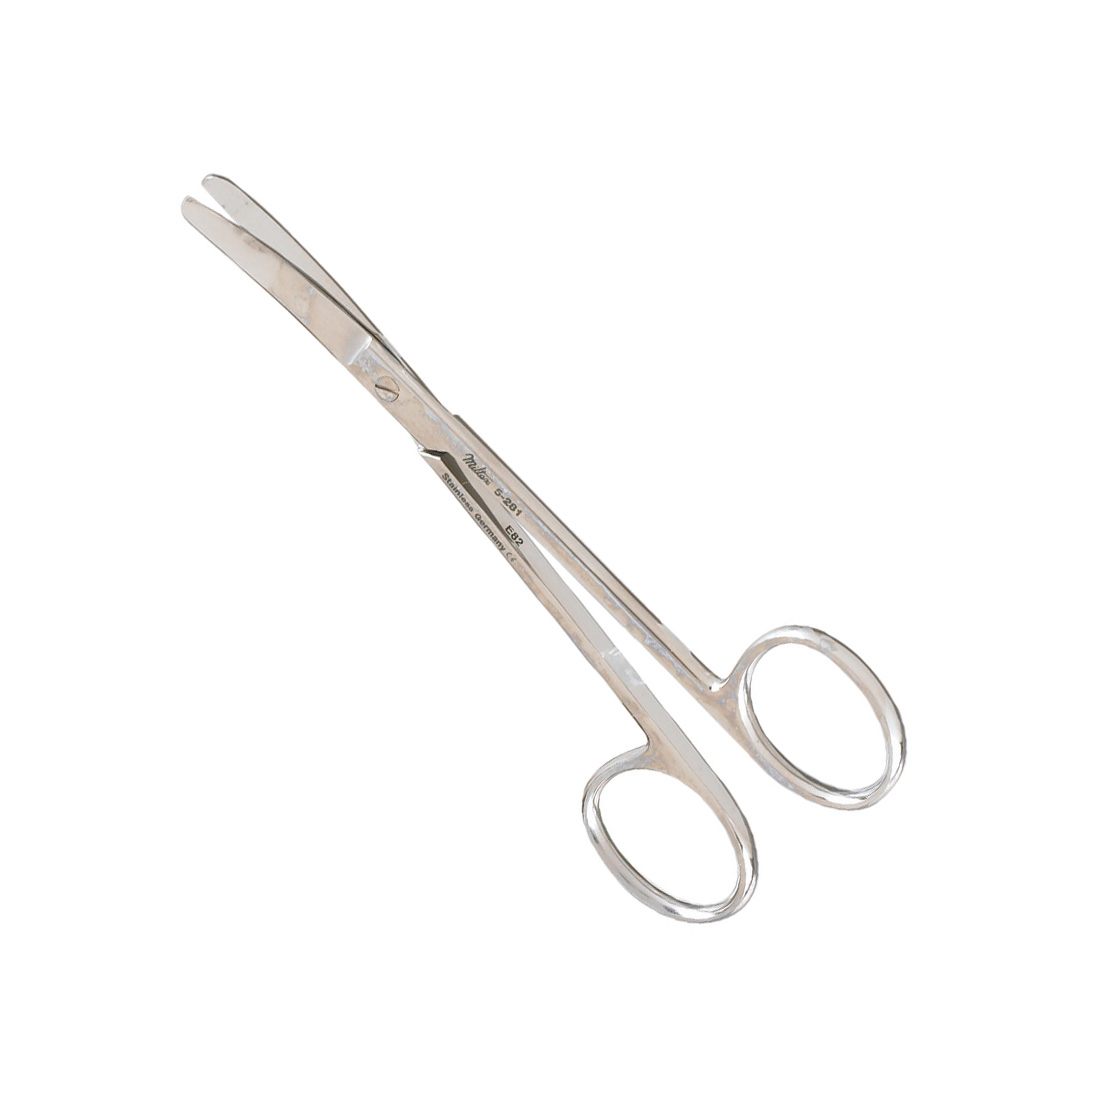 Wagner Plastic Surgery Scissors, Curved,  Blunt-Blunt Points Serrated Blade